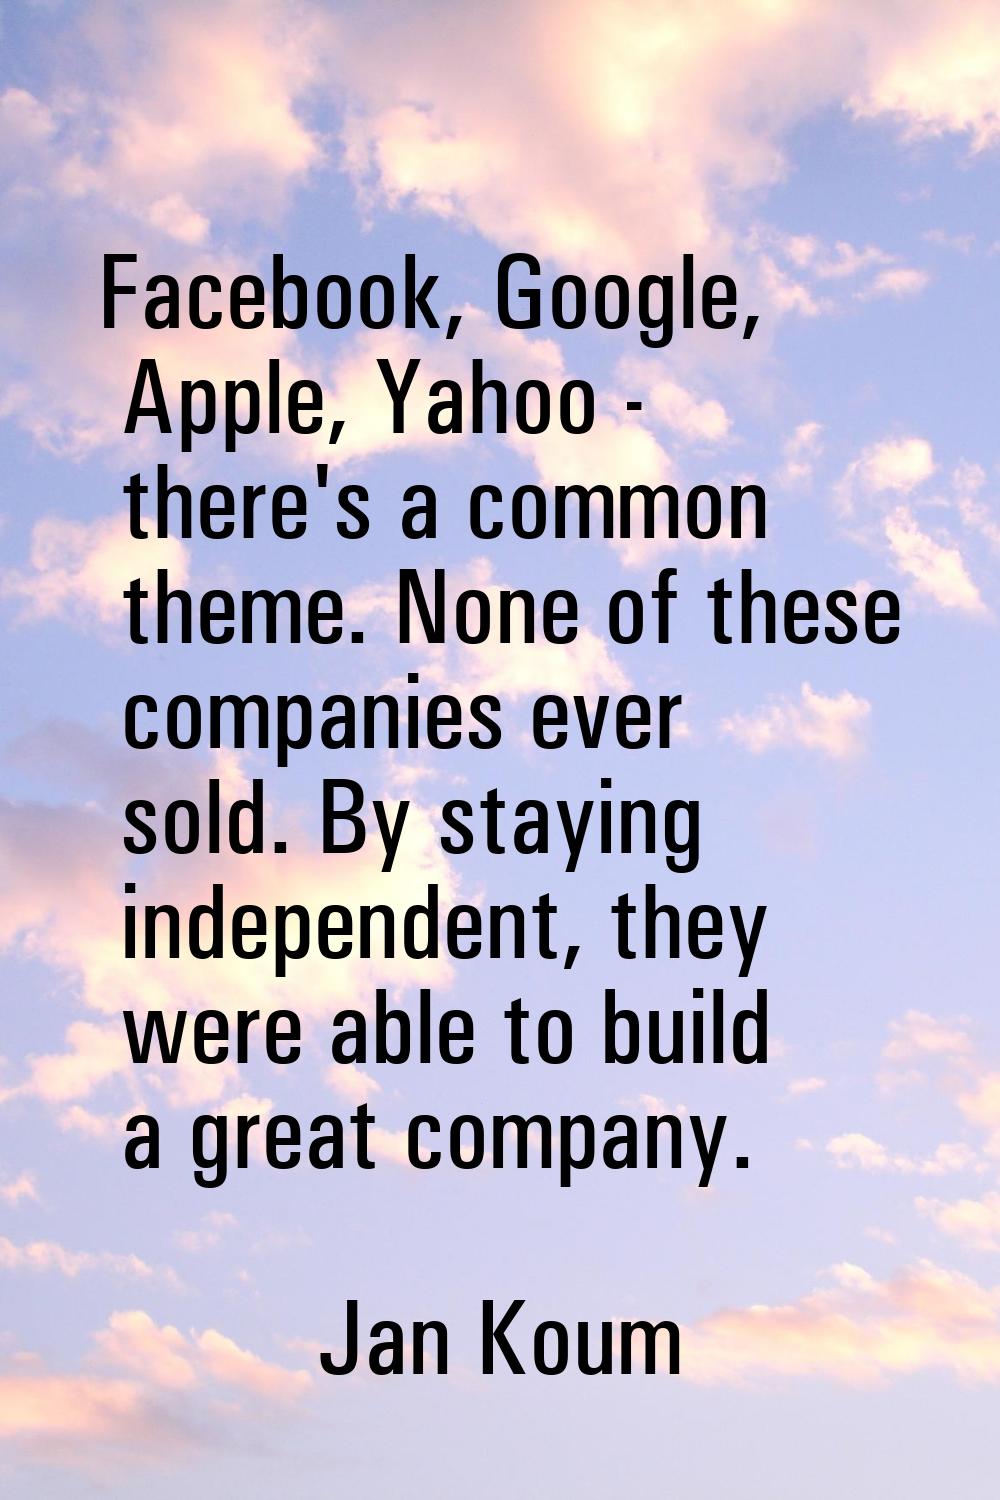 Facebook, Google, Apple, Yahoo - there's a common theme. None of these companies ever sold. By stay